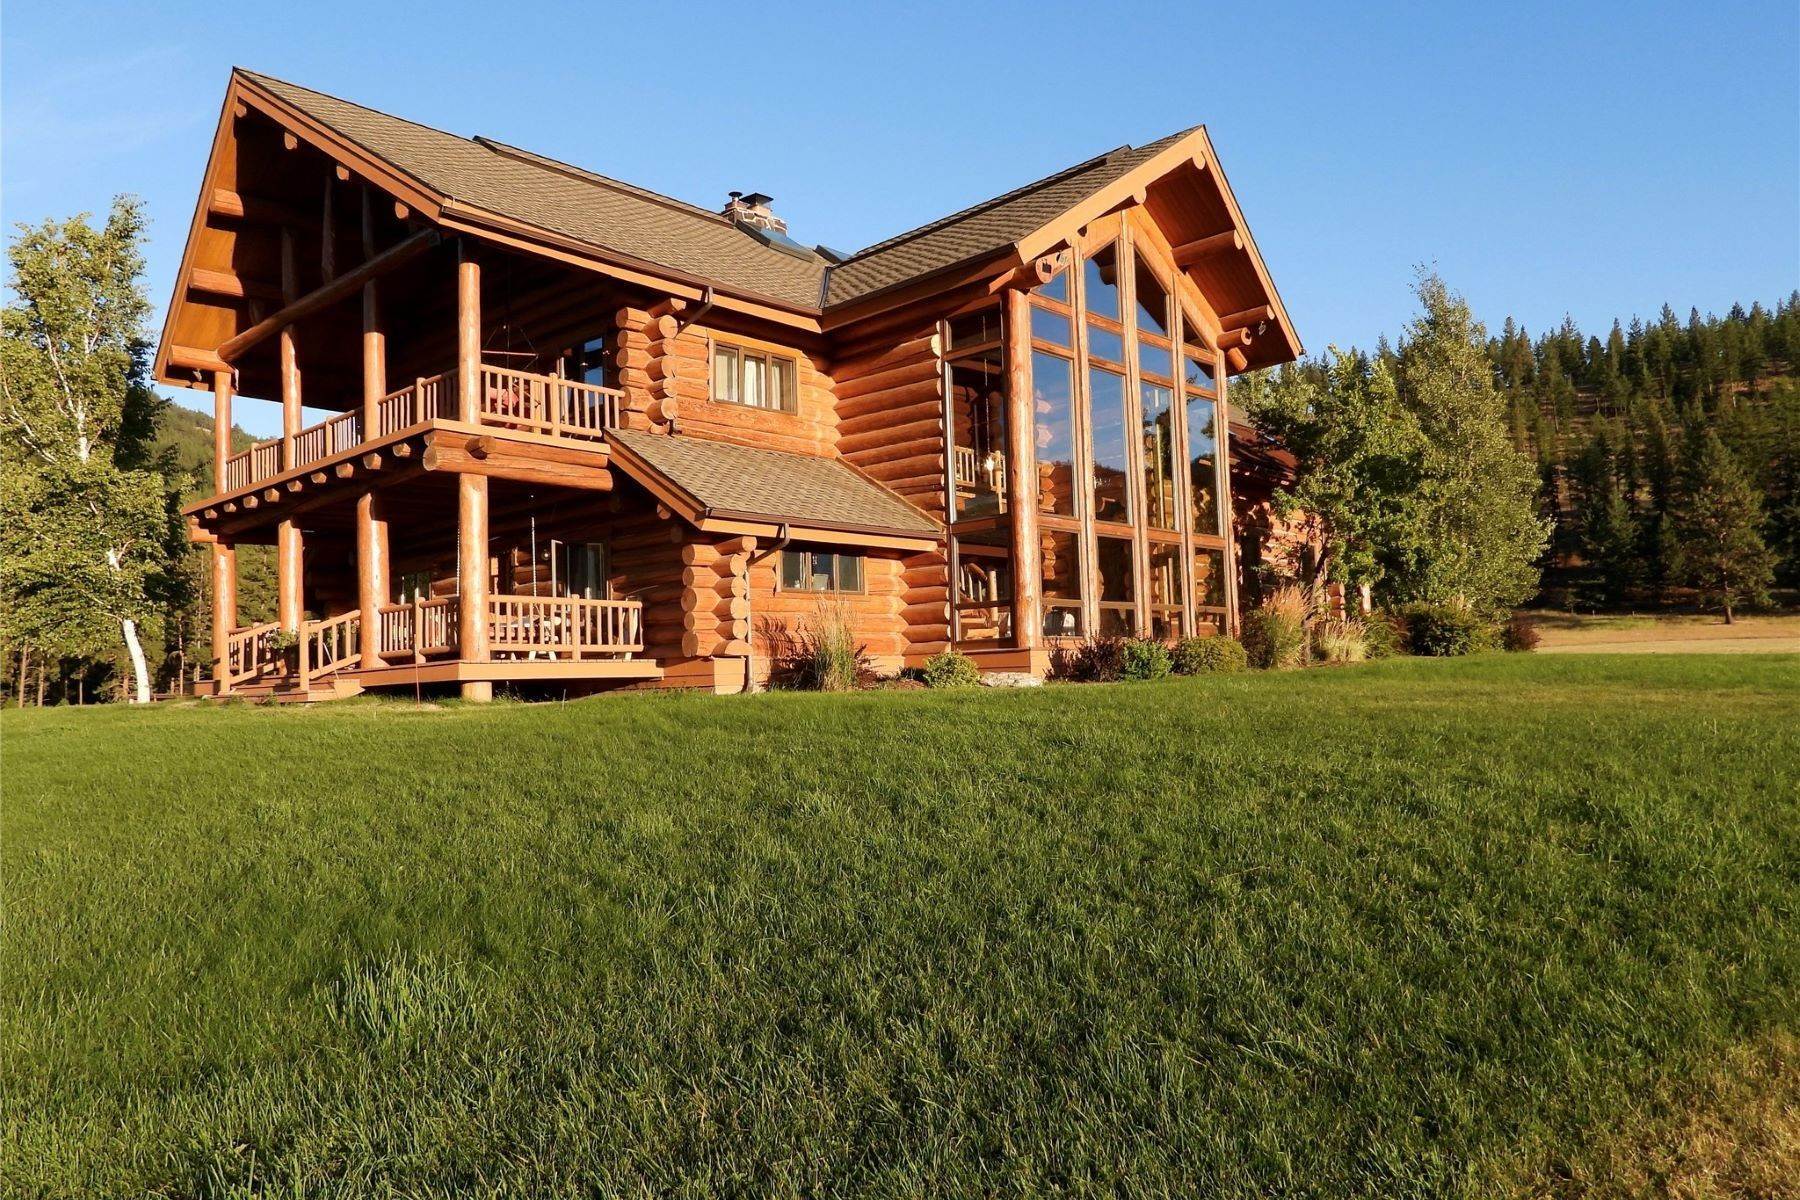 Single Family Homes for Sale at Rubicon Ranch Rubicon Ranch, Alberton, Montana 59820 United States